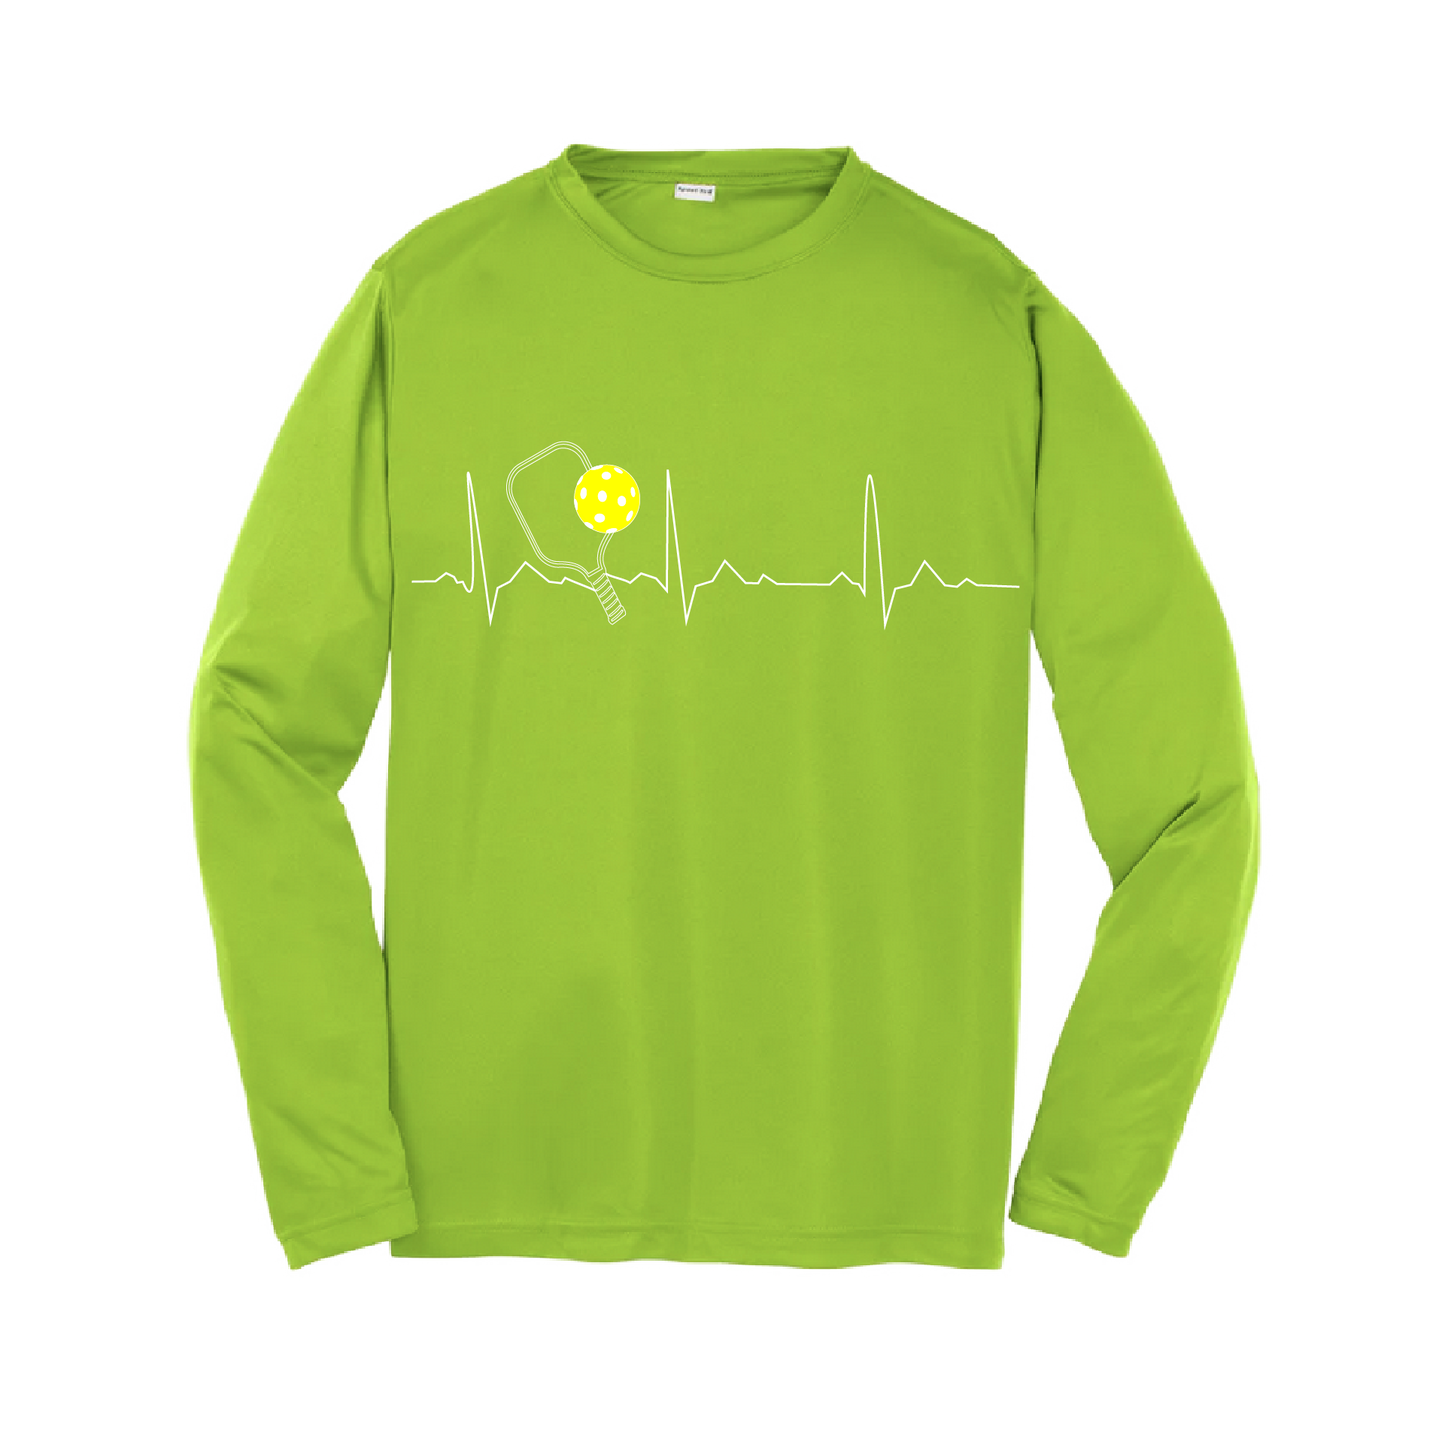 Pickleball Design: Heartbeat  Youth Styles: Long Sleeve  Shirts are lightweight, roomy and highly breathable. These moisture-wicking shirts are designed for athletic performance. They feature PosiCharge technology to lock in color and prevent logos from fading. Removable tag and set-in sleeves for comfort.